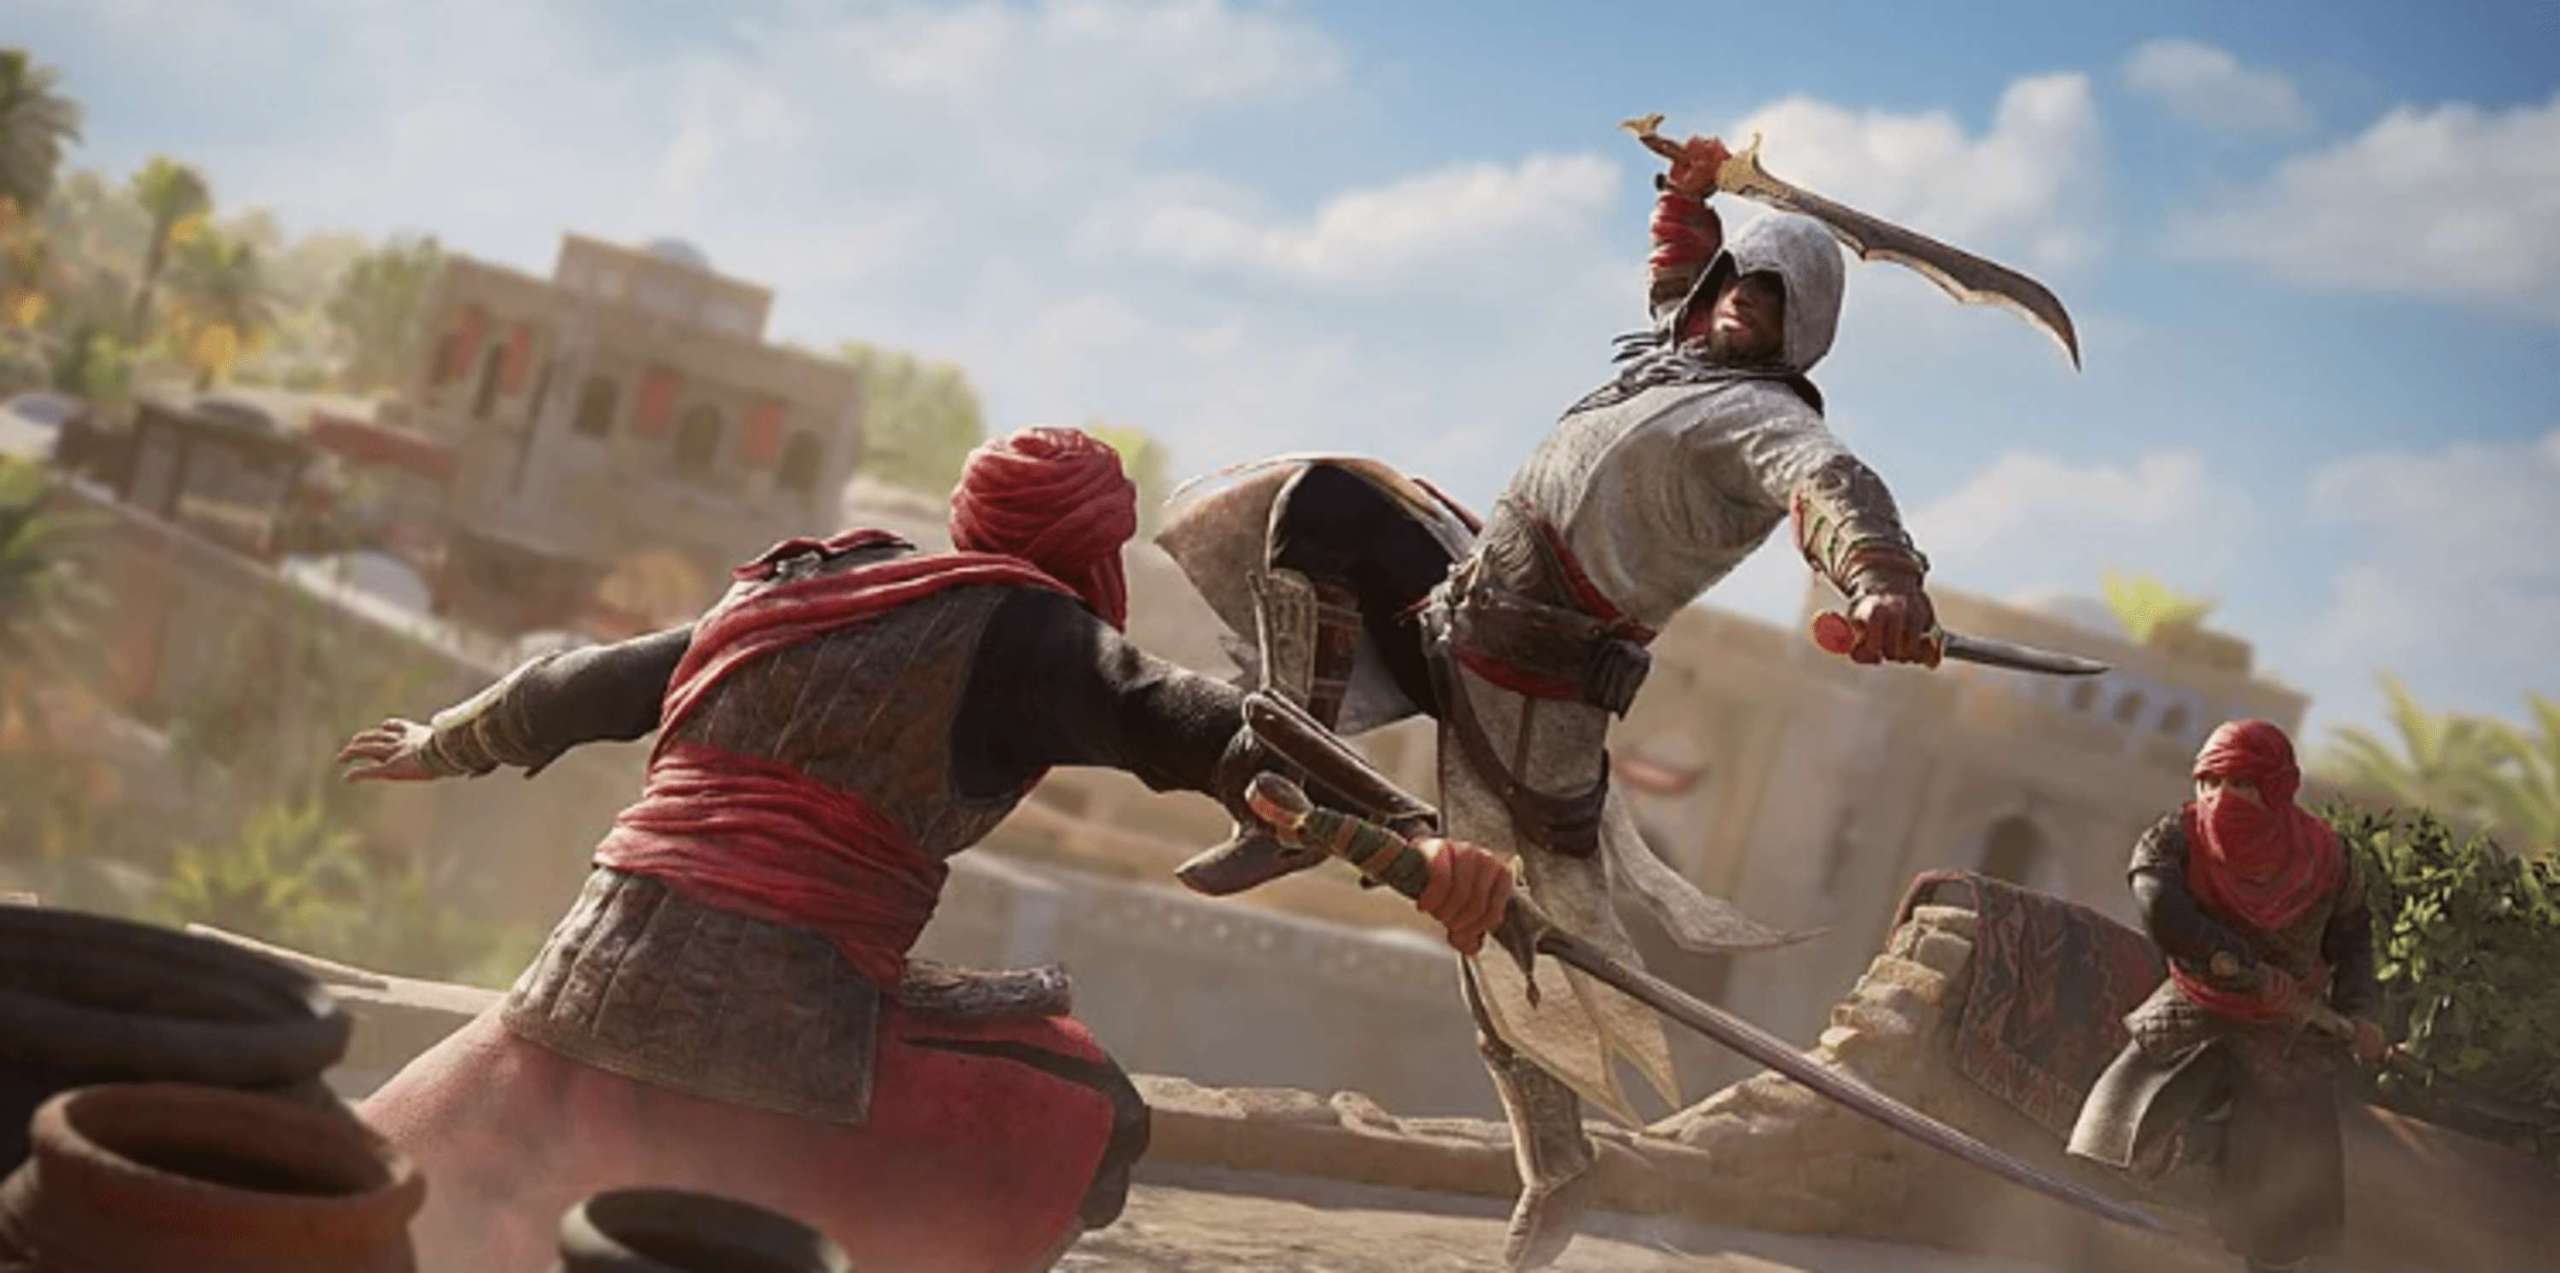 Mirage, The Upcoming Assassin’s Creed Video Game By Ubisoft, Stars Basim